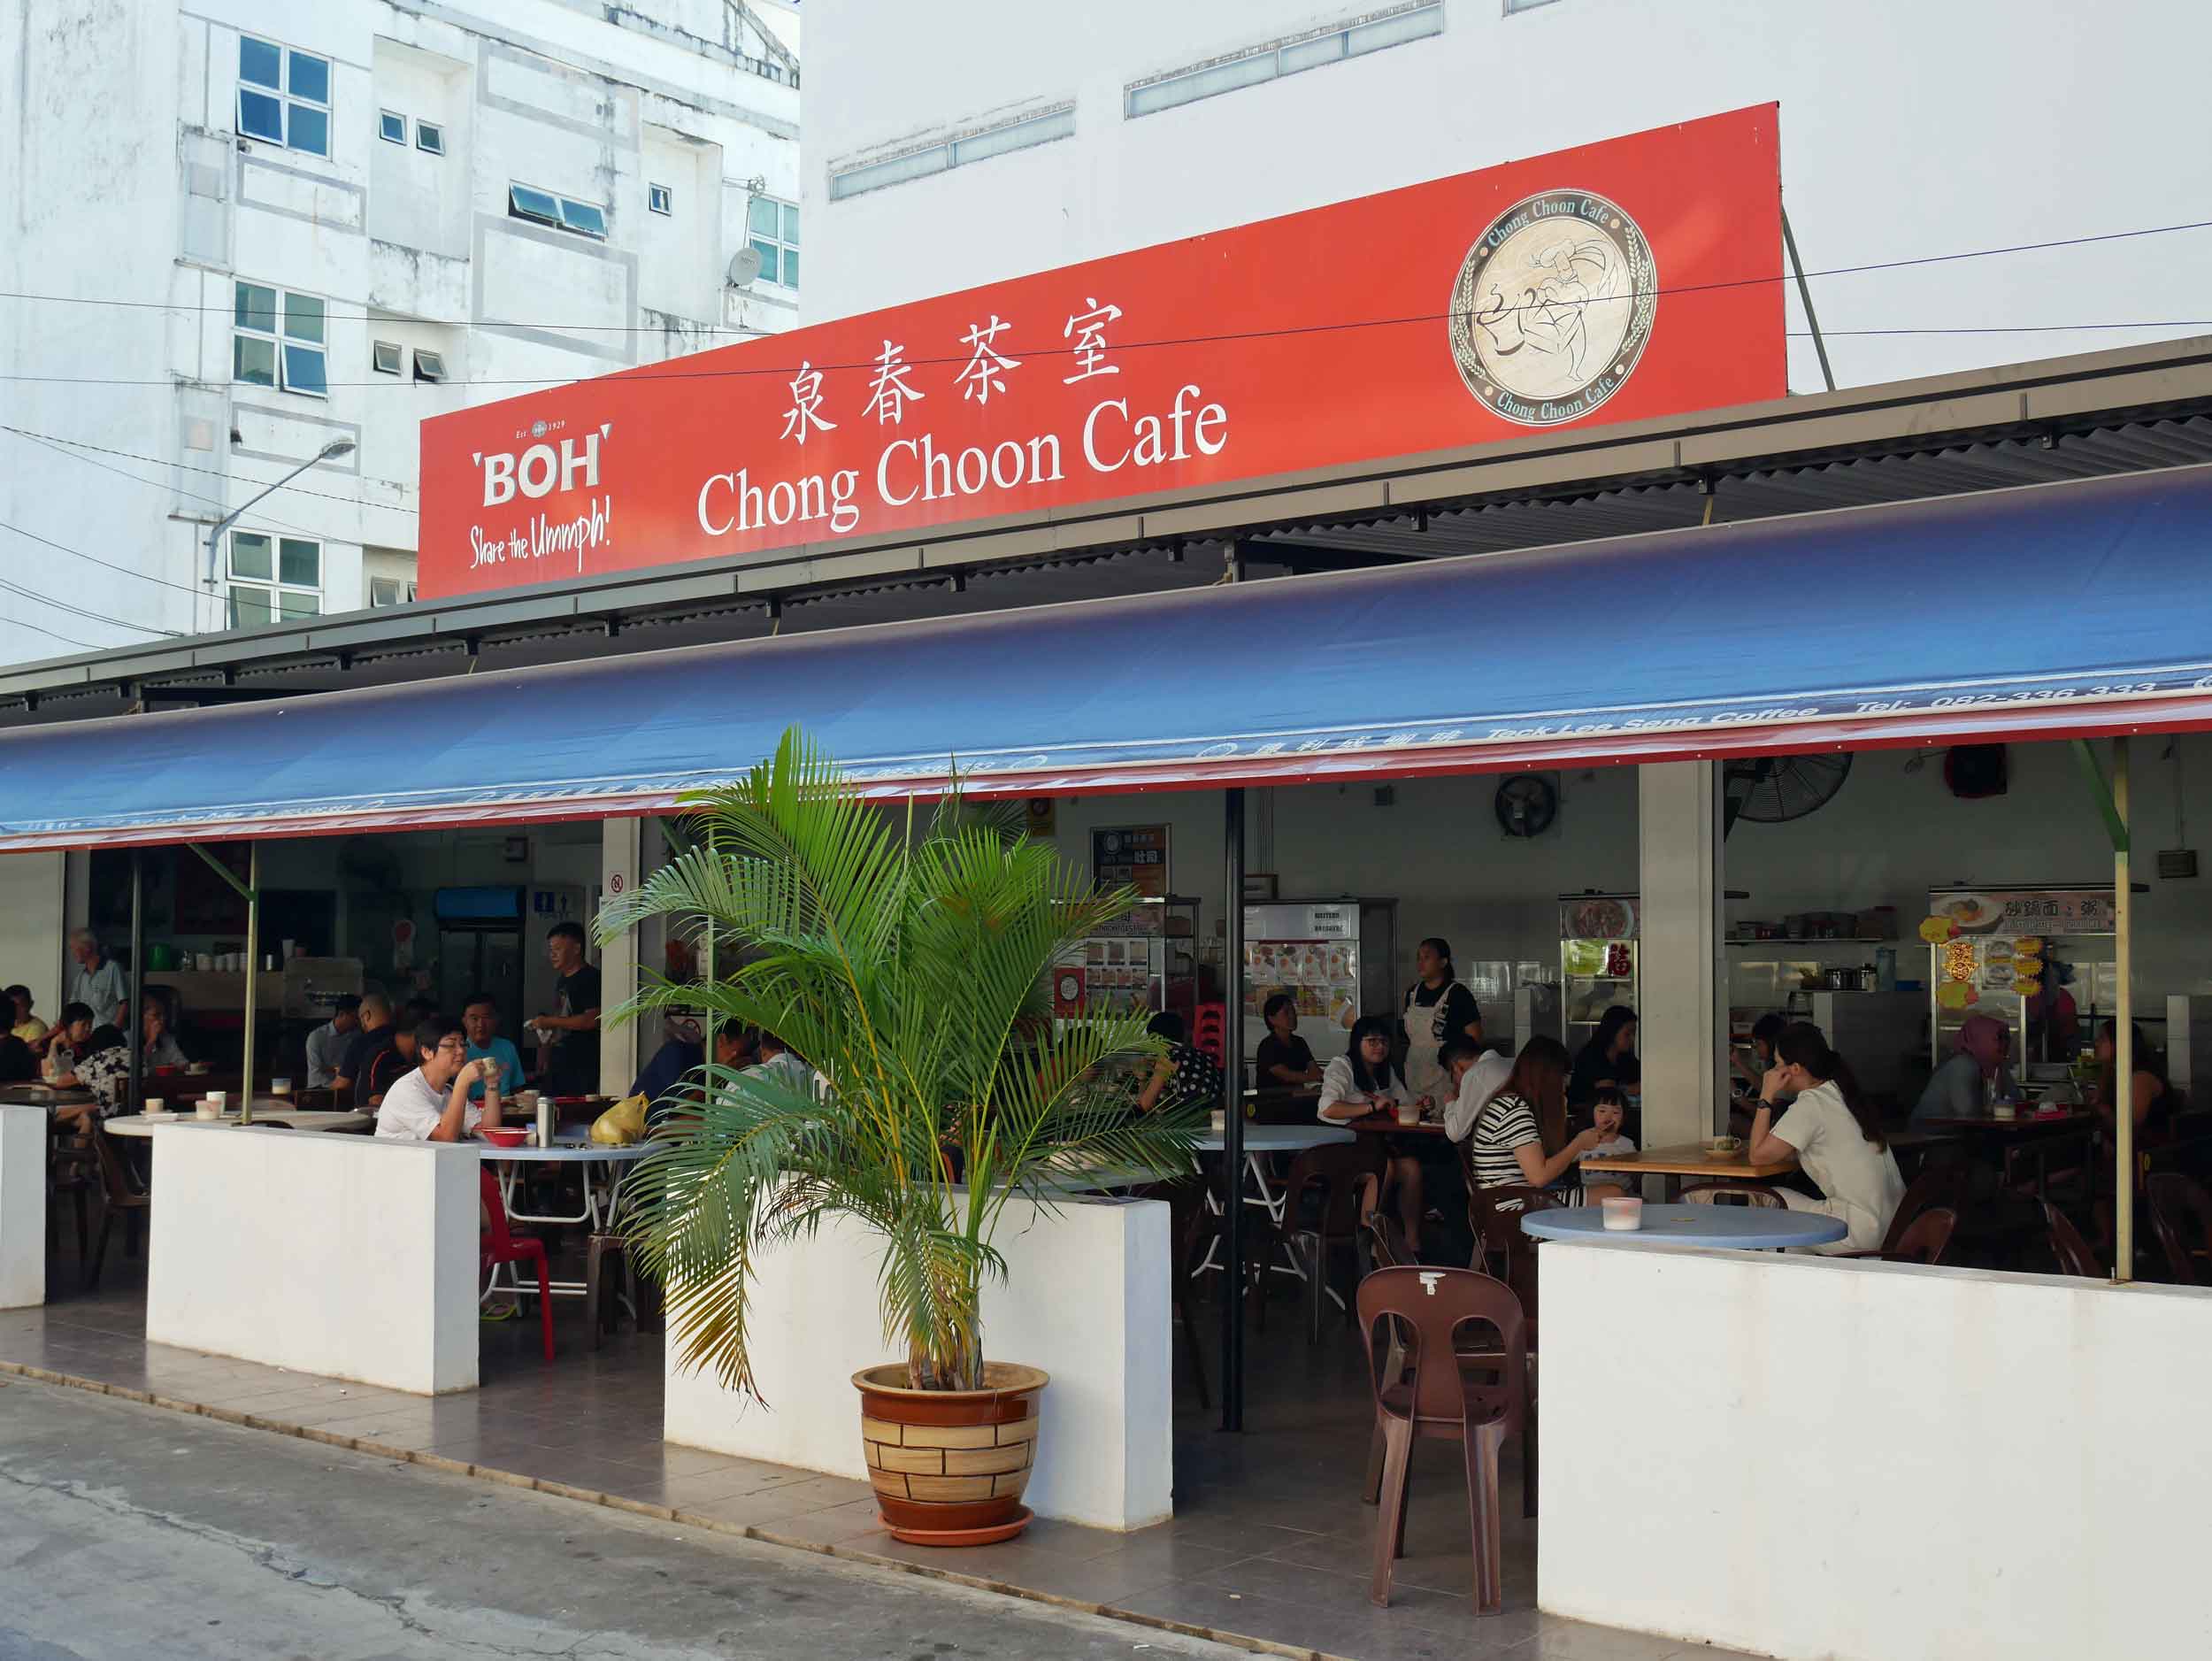  A local favorite, we headed to Chong Choon Cafe several mornings for our bowl of steaming  prawn laksa  and iced coffees (May 4).&nbsp; 